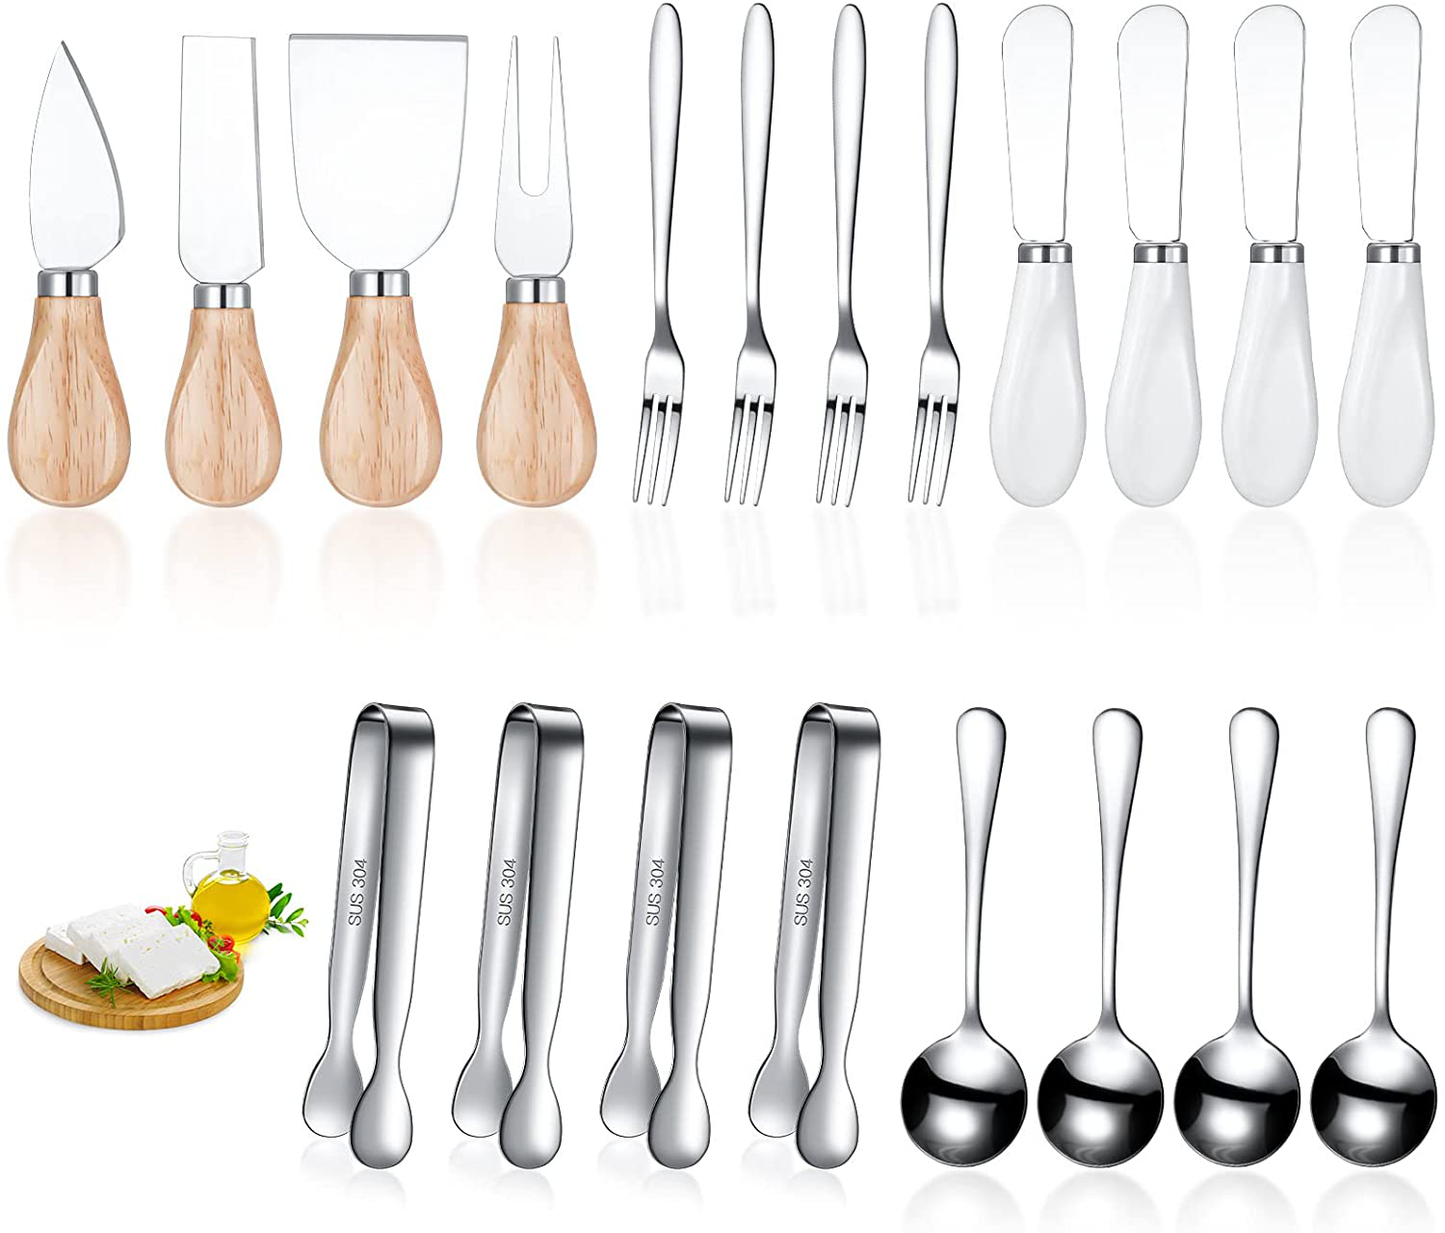 20 Pcs Spreader Knife Set Cheese Butter Spreader Knife Cheese Slicer Knife Stainless Steel Blade with Porcelain and Wooden Handles Mini Serving Tongs Spoons and Forks for Christmas (Chic Style)